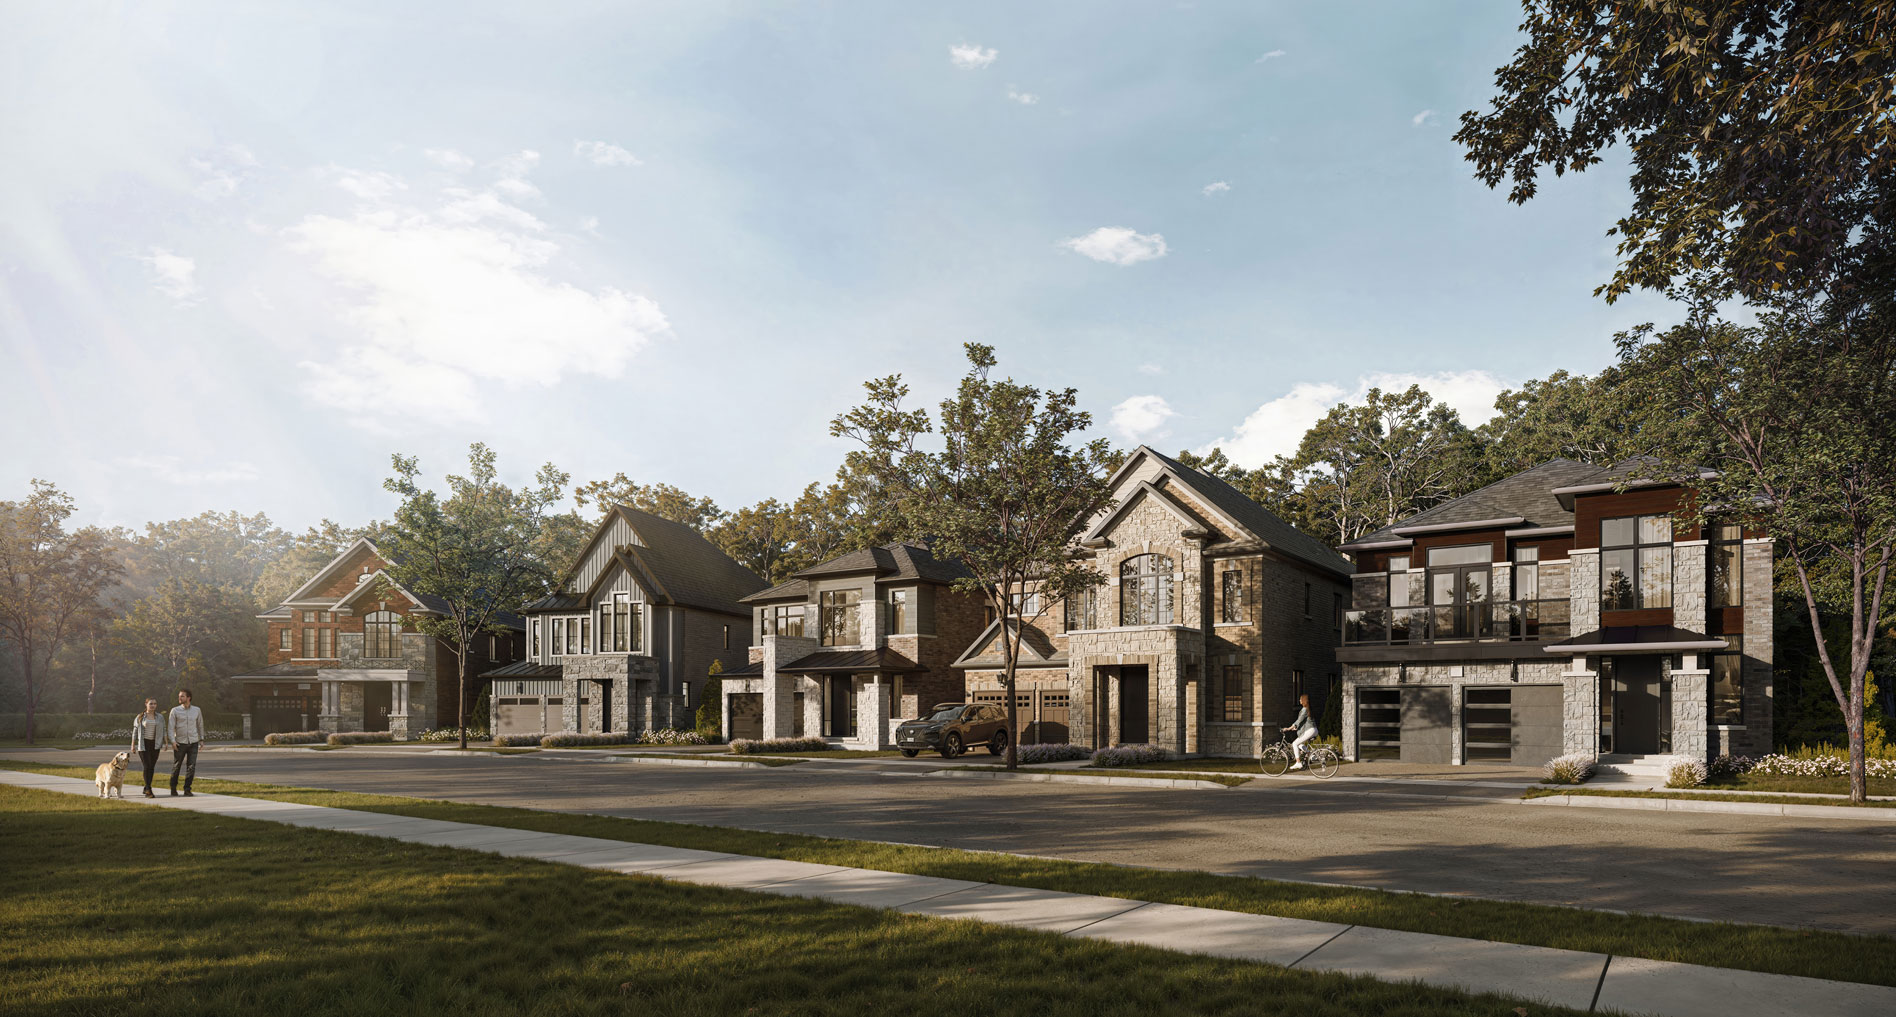 the exterior view of Zancorbrooklin Homes. Embraced by the lush greenery, this master-planned community finds its home in Brooklin